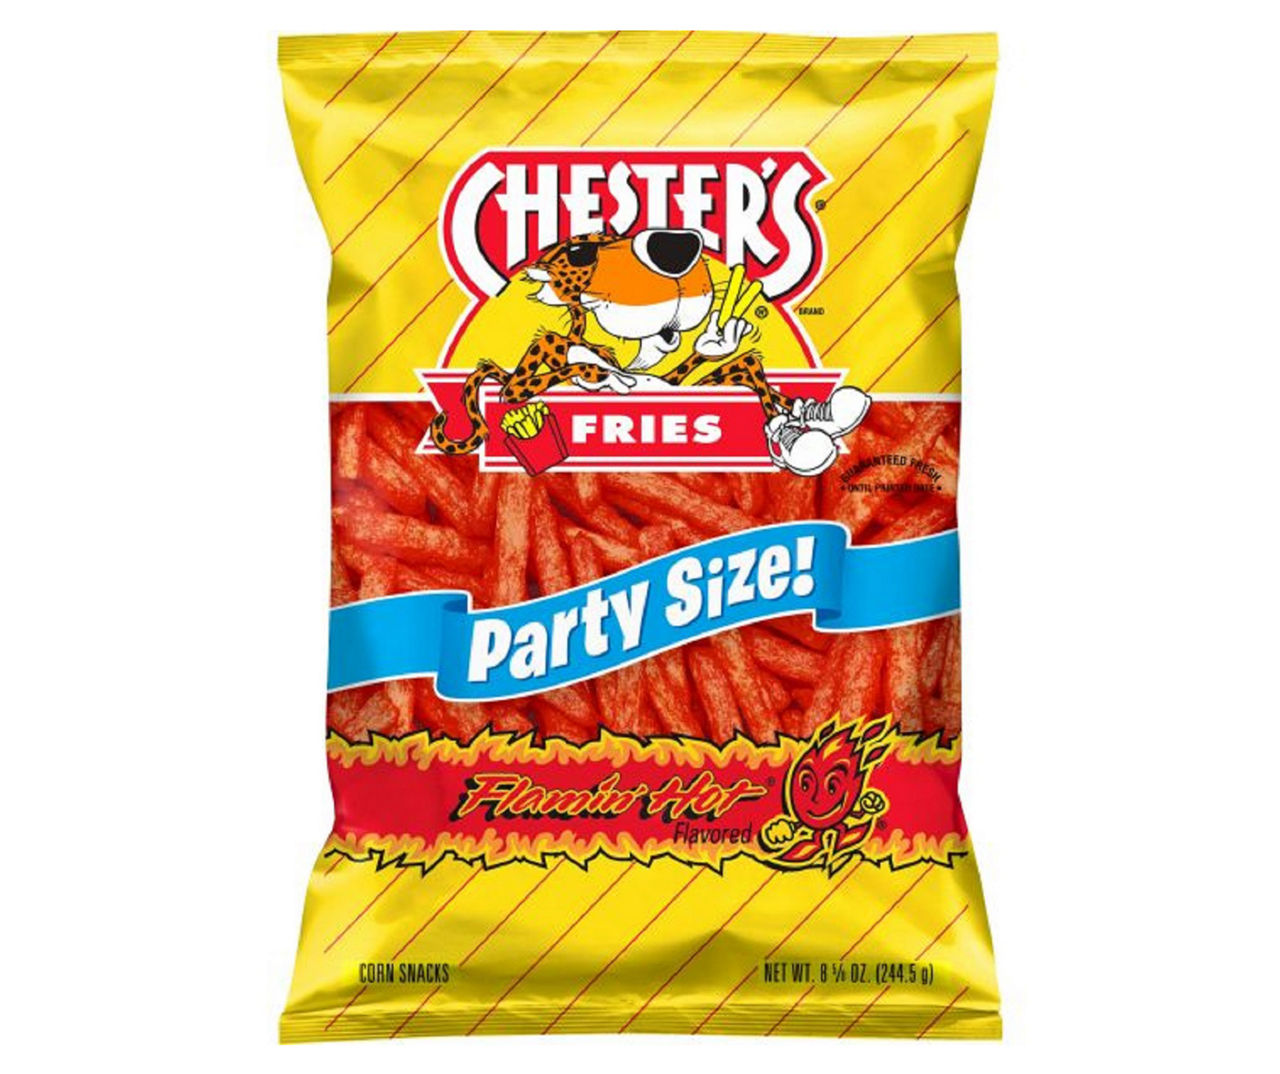 Customer Calls Our Increasing Price of Chester's Hot Fries